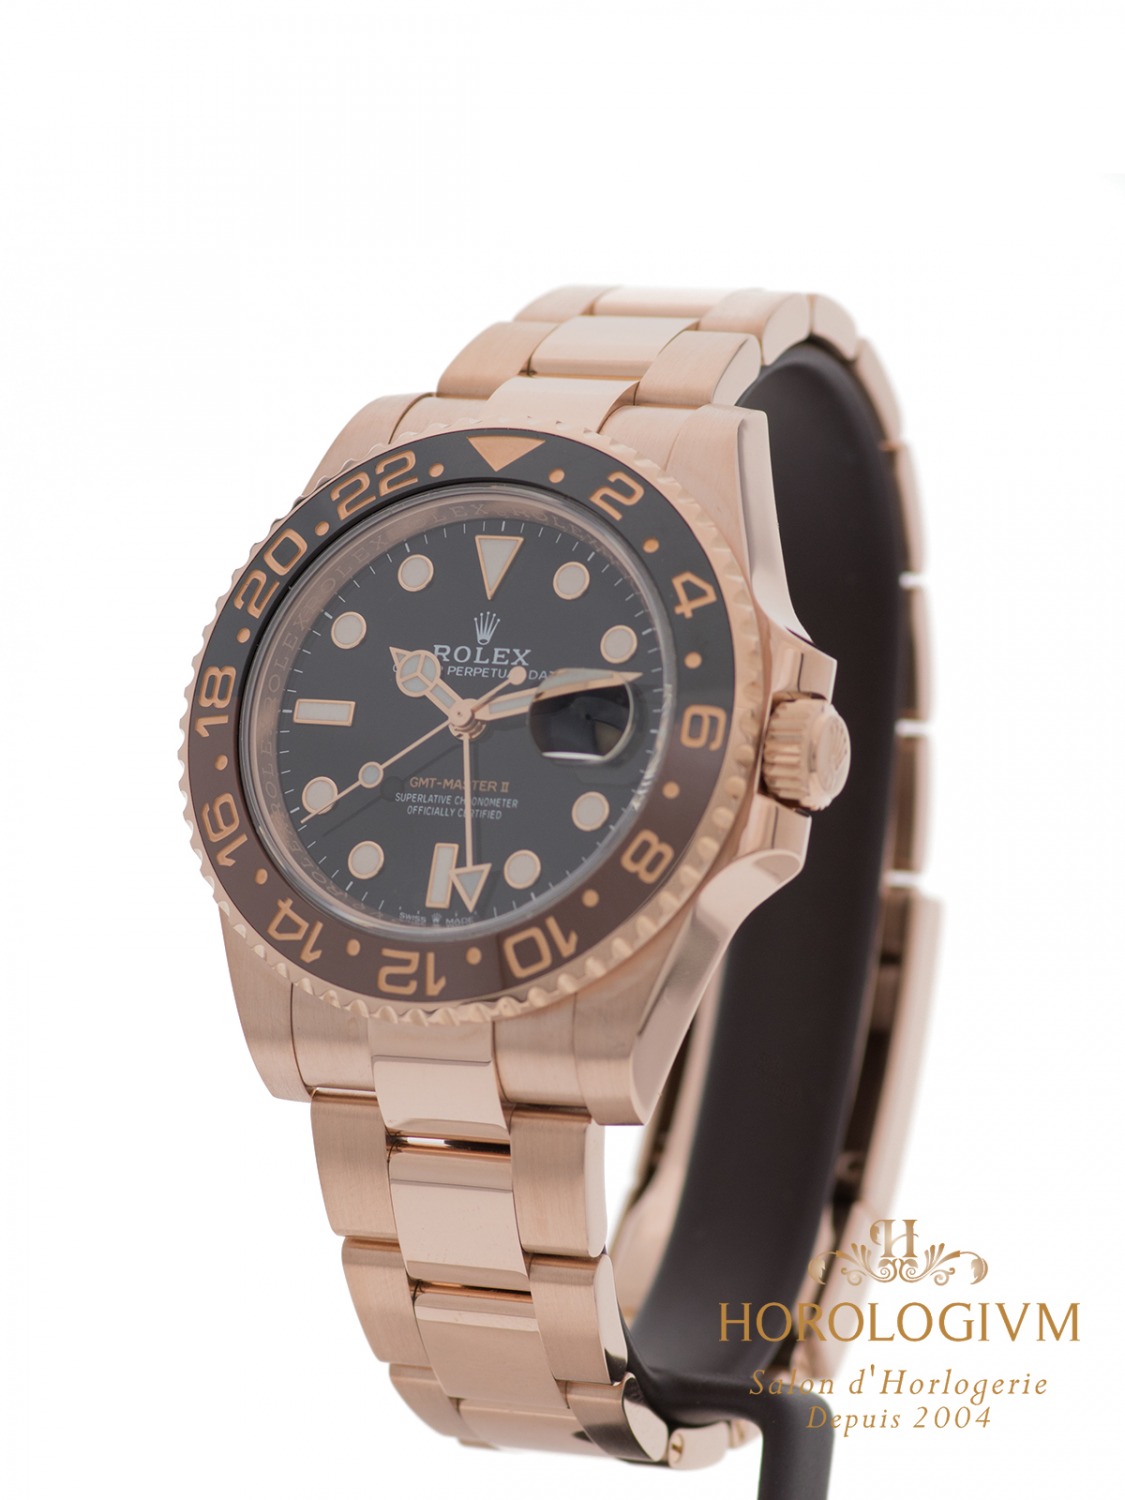 Rolex GMT-Master II Rose Gold Rootbeer Ref. 126715CHNR watch, rose gold